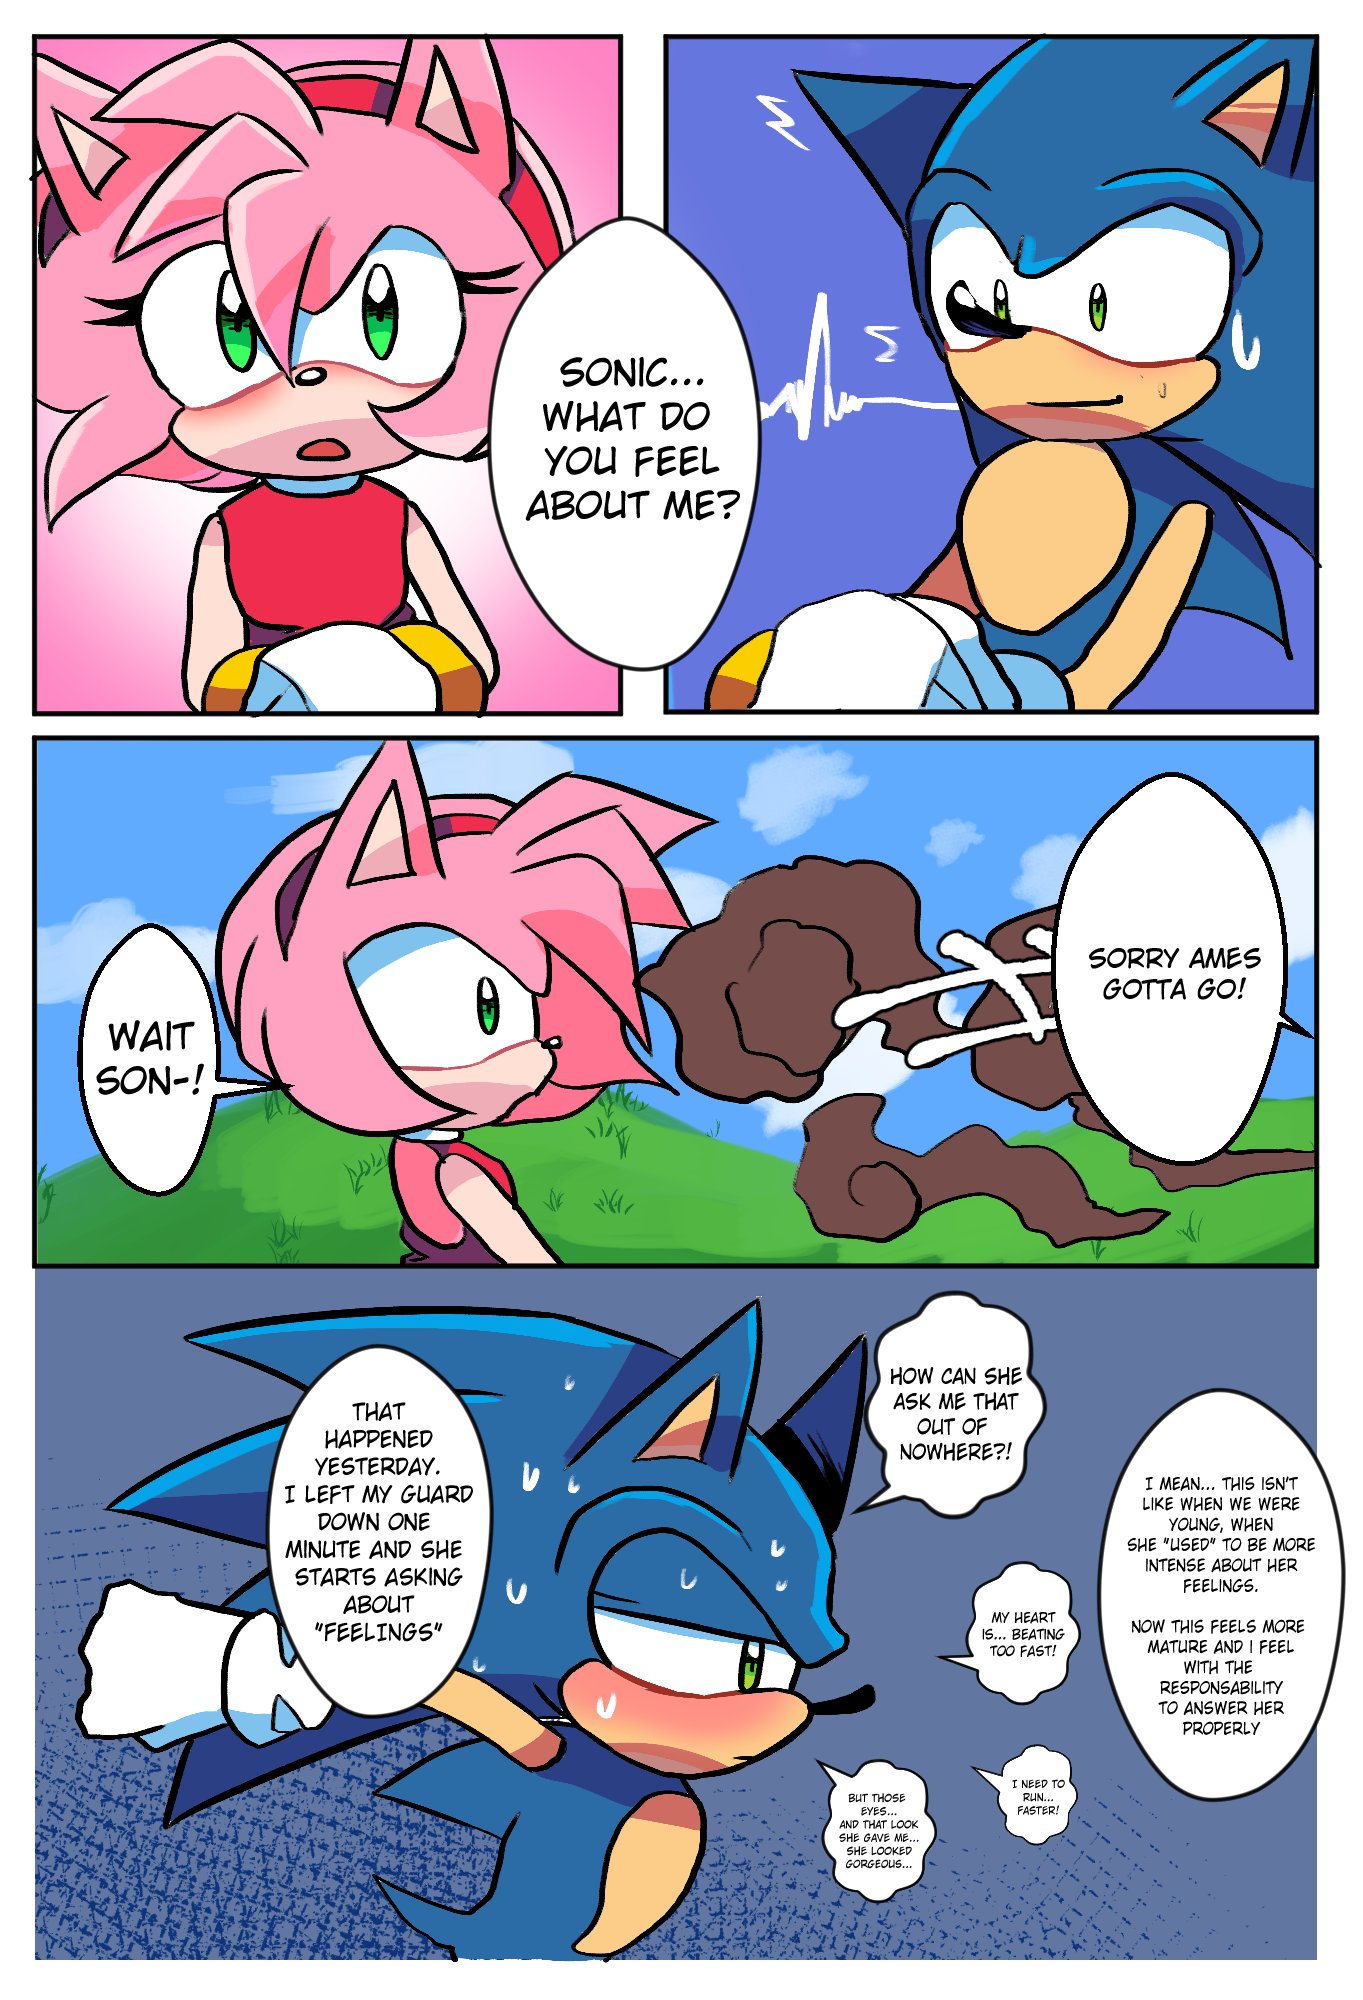 Daeream on X: First Part of my Sonamy Comic, 2k Special! There a more  pages left, but i will post the other parts laterThank you so much again  for the support! #SonAmy #